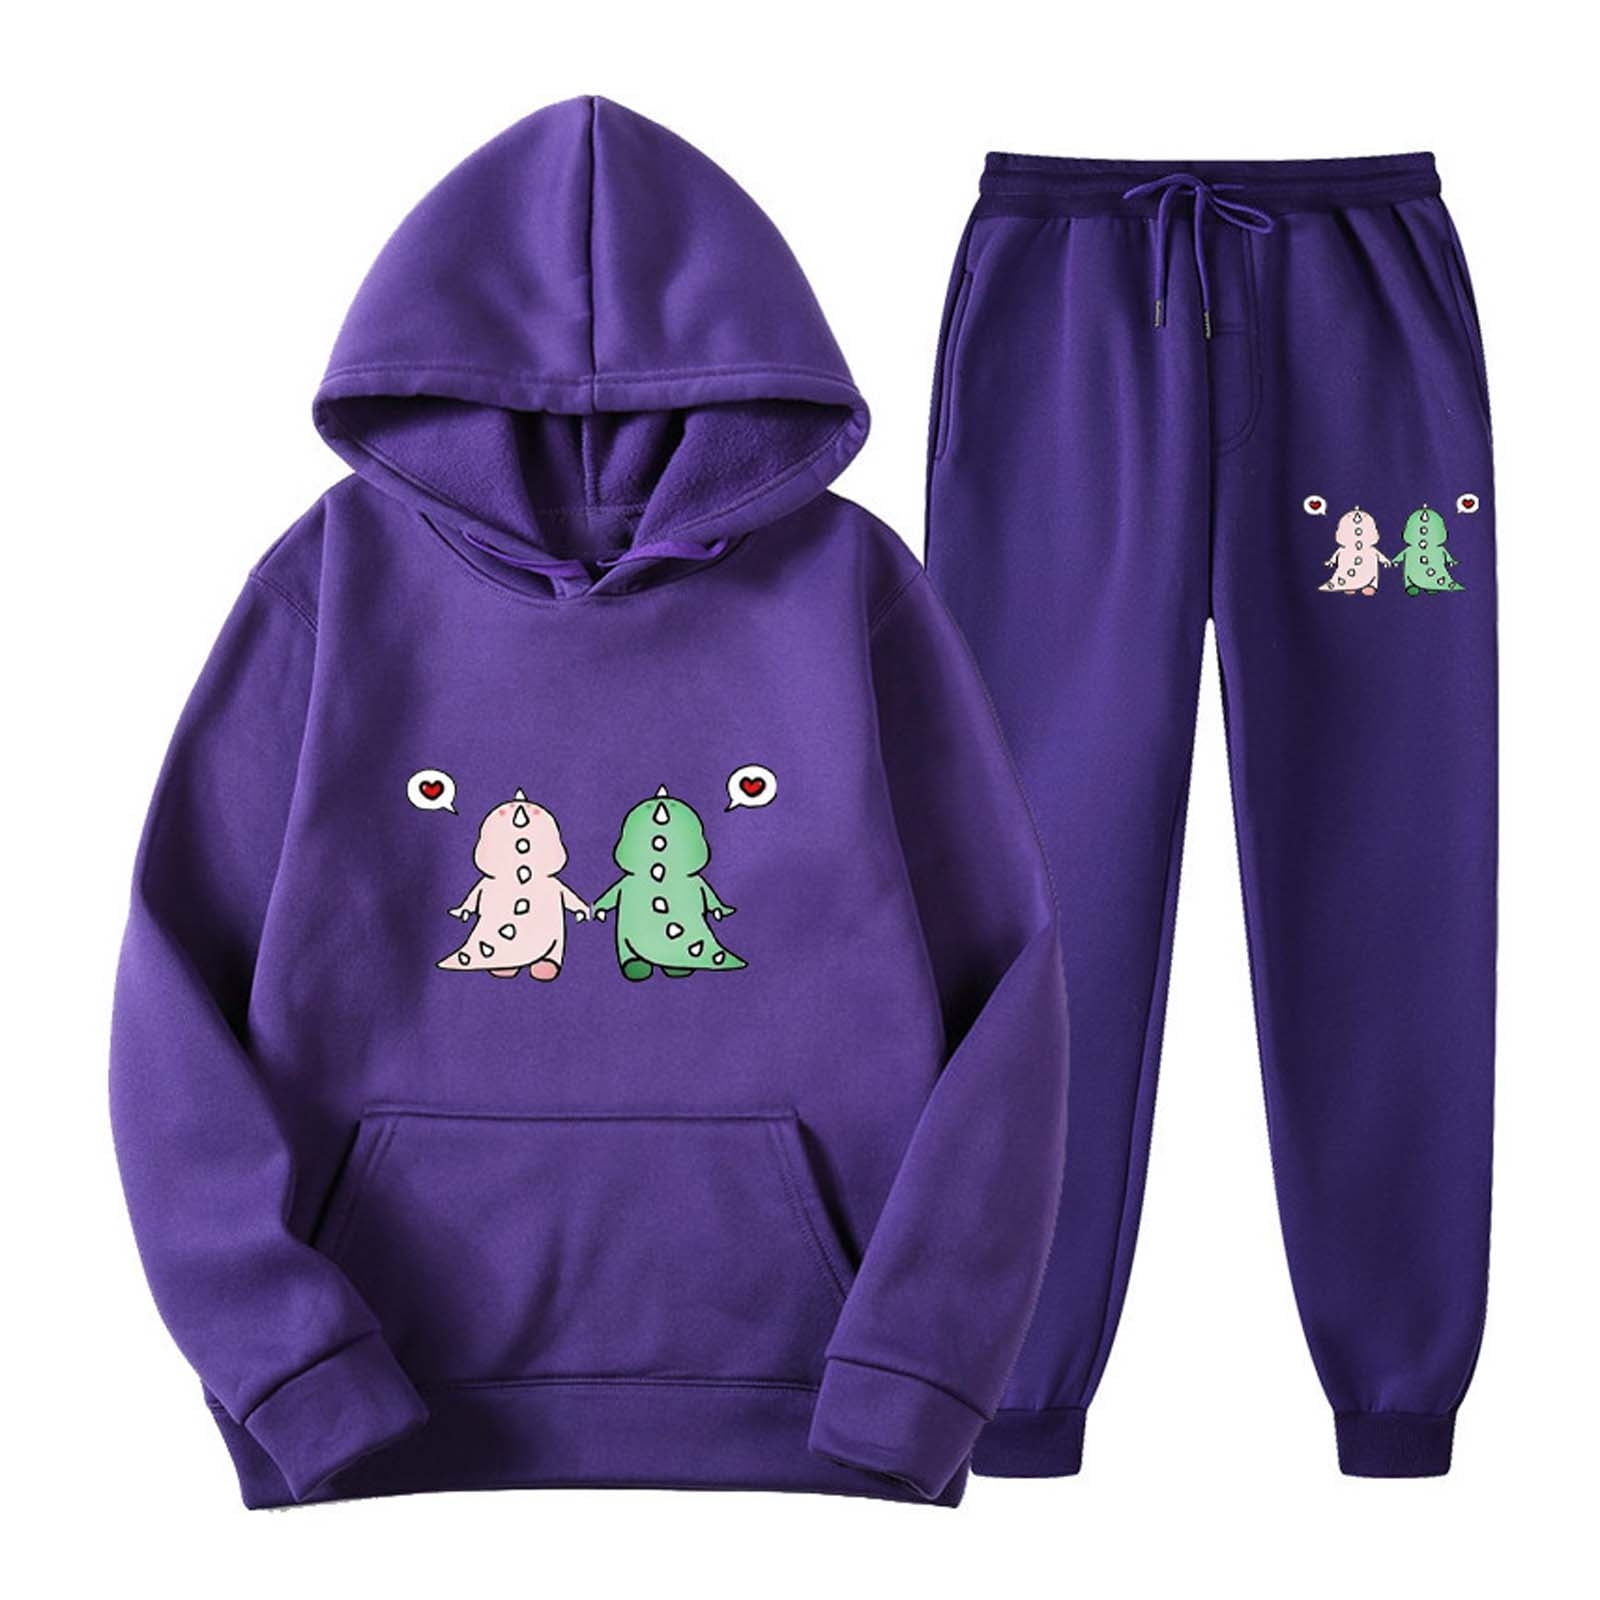 Reduced Lounge Outfits Two Pockets Purple Hoodie Dinosaur Sweatpants for Suit Women with Kangaroo Sweatshirt Sets L Sweatsuits RQYYD Set Pullover Piece